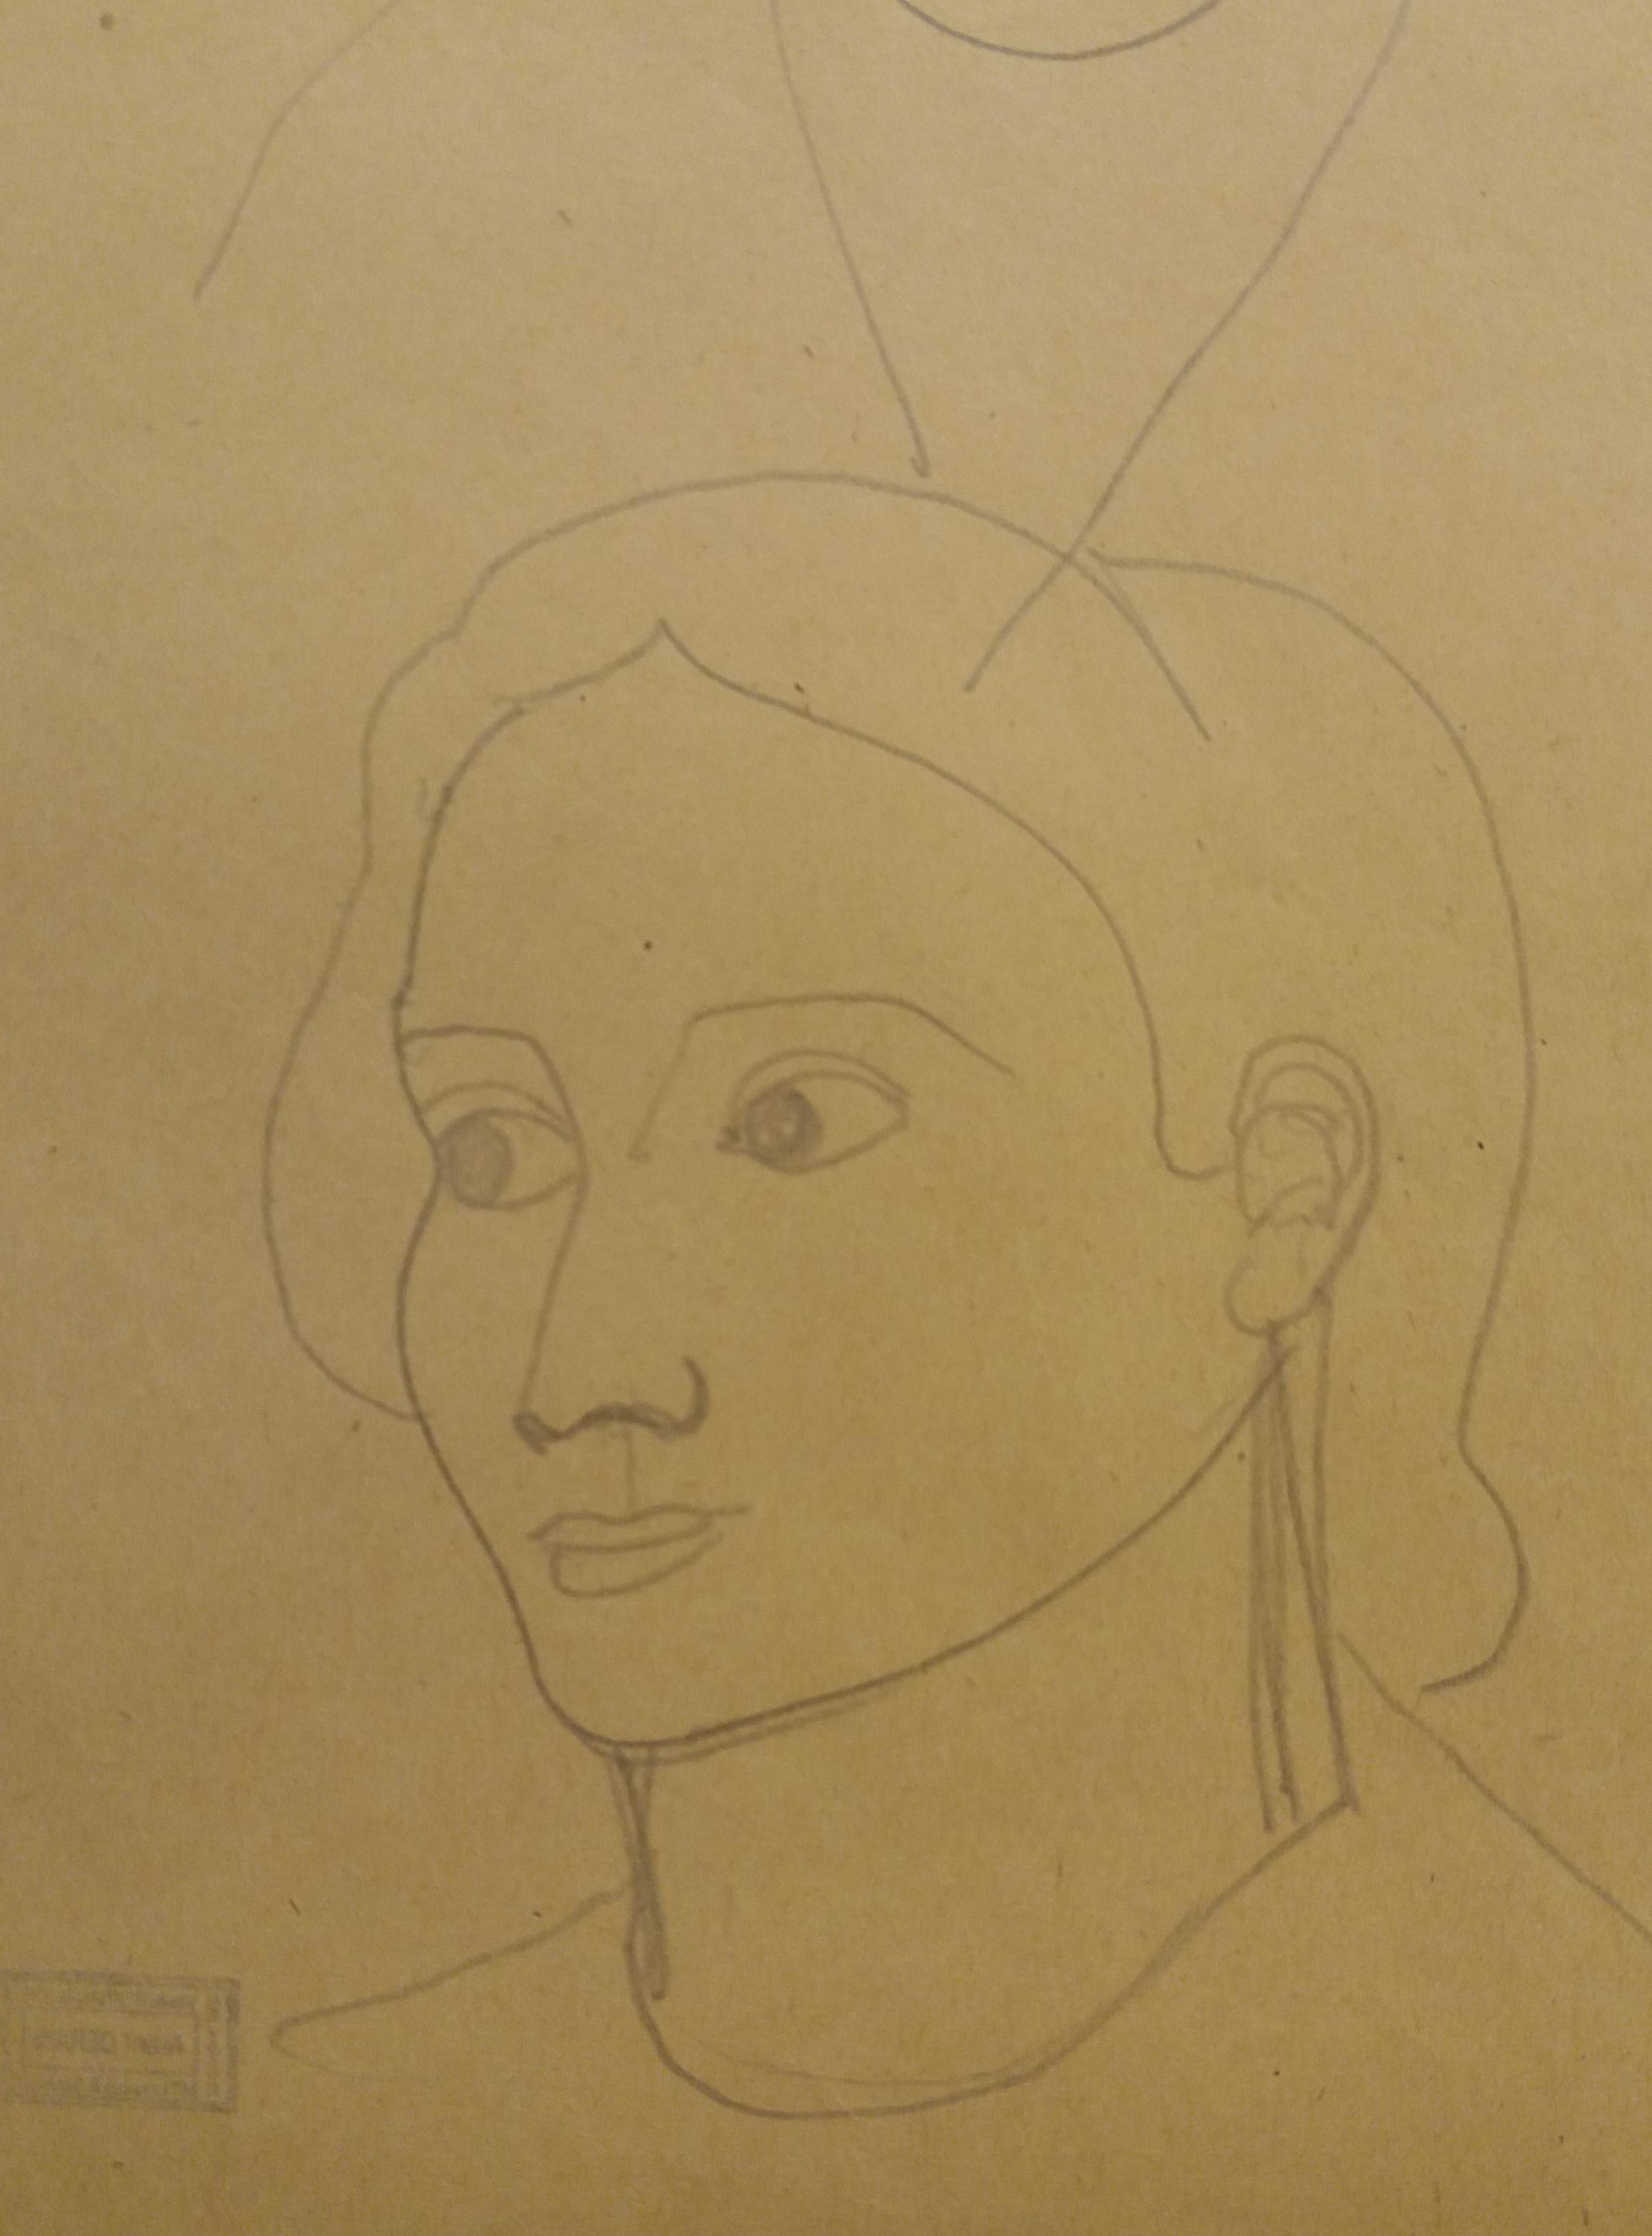  profile face. original pencil drawing painting
André Derain (Chatou, June 10, 1880-Garches, September 8, 1954) was a French painter, illustrator and set designer, representative of Fauvism.

Derain was eighteen years old when he entered the